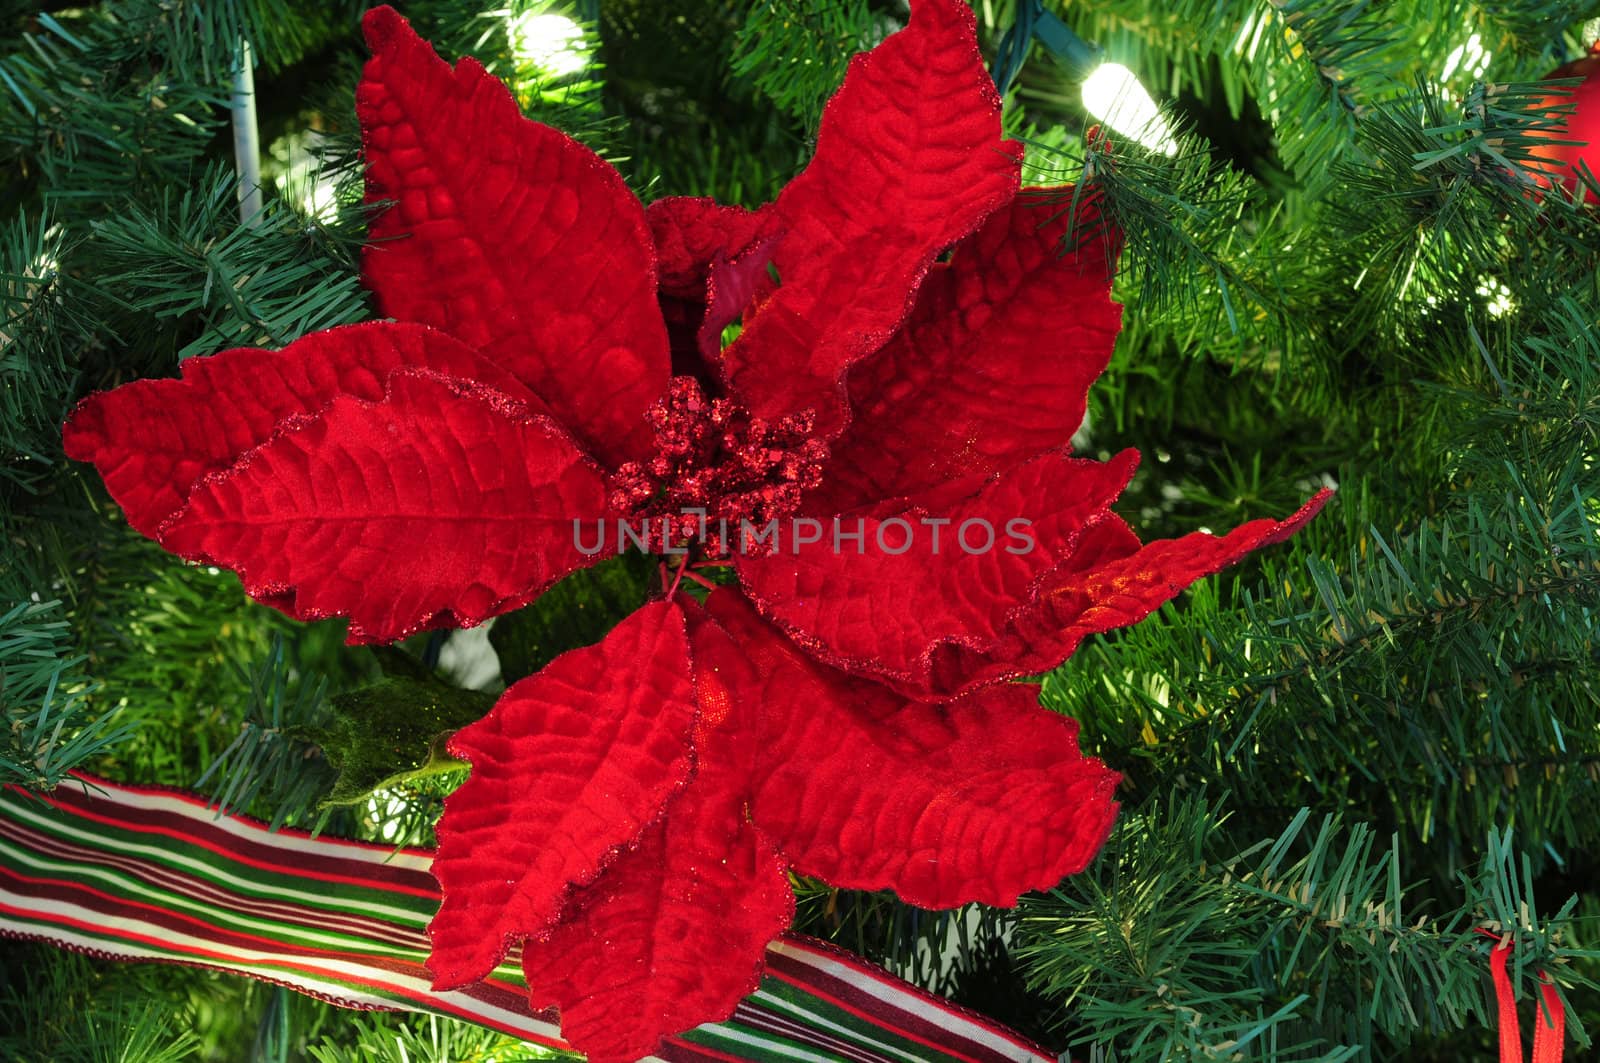 Red Poinsettia on Christmas tree